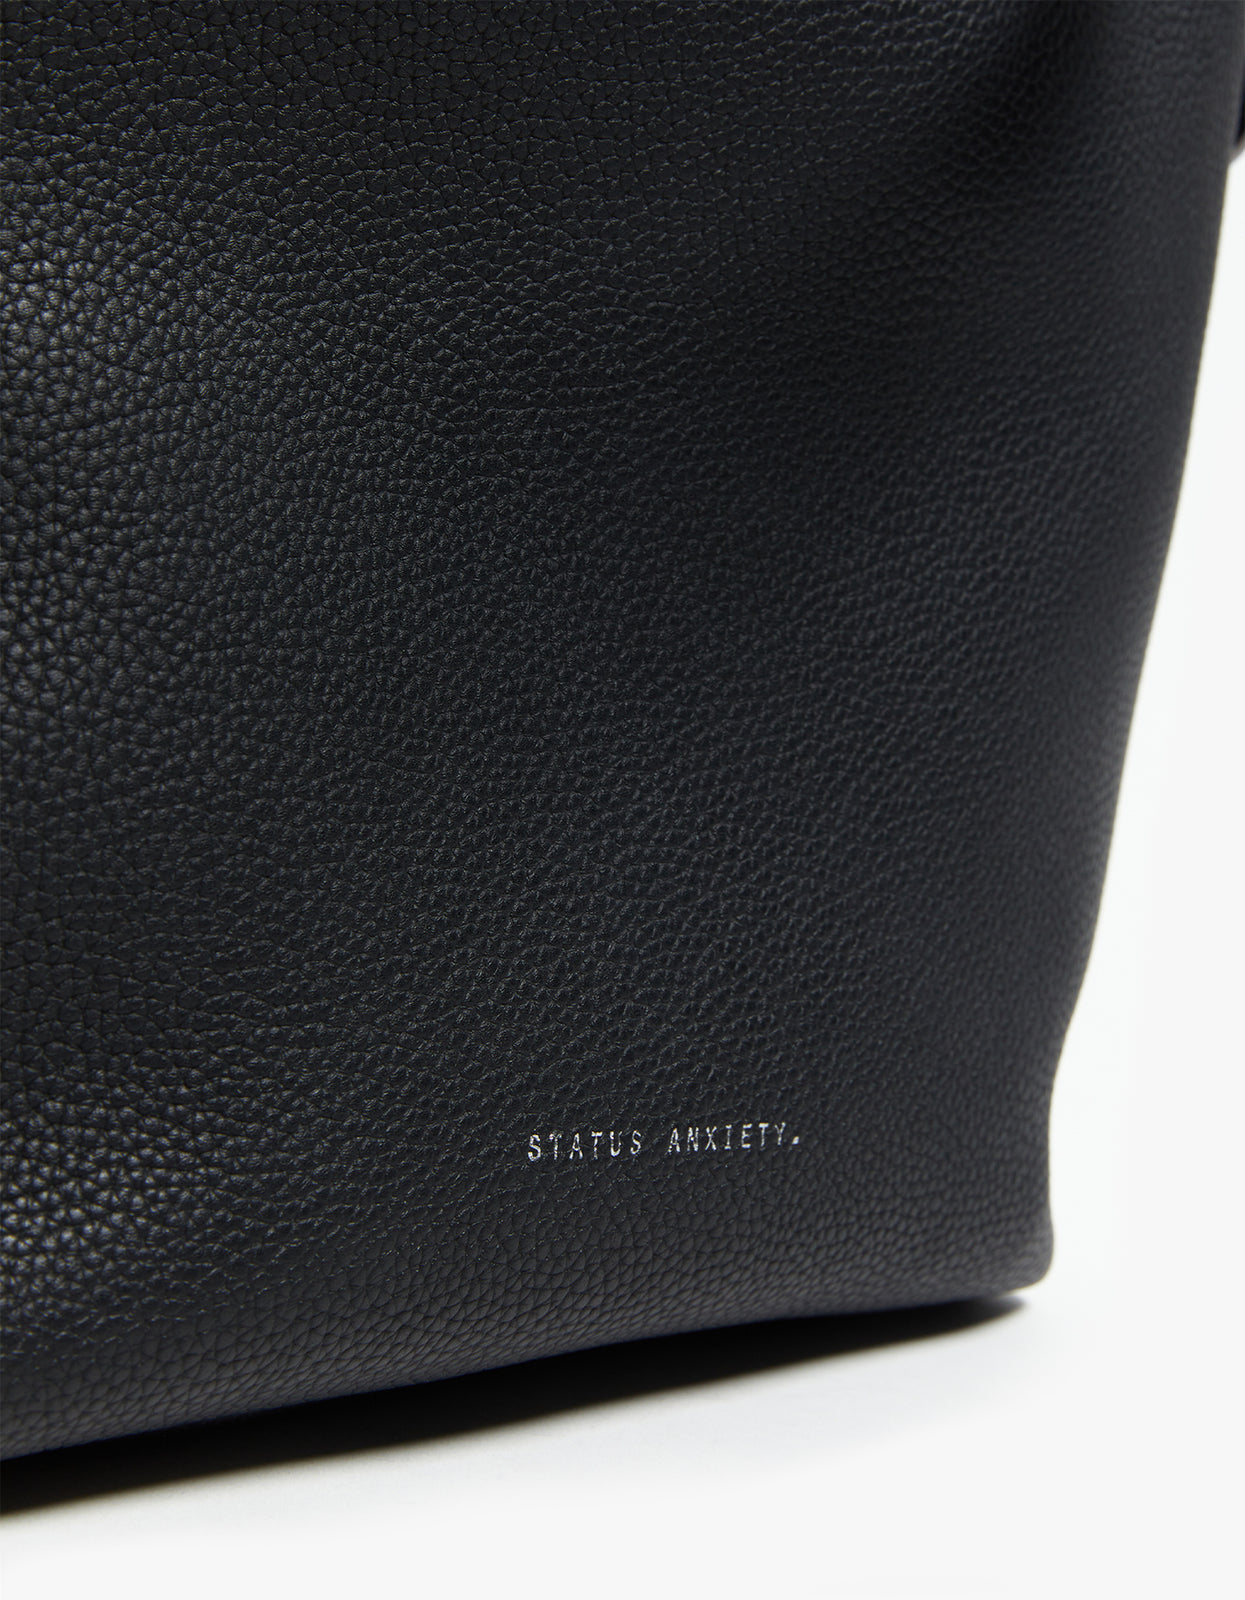 Superette | Ready and Willing Bag - Black